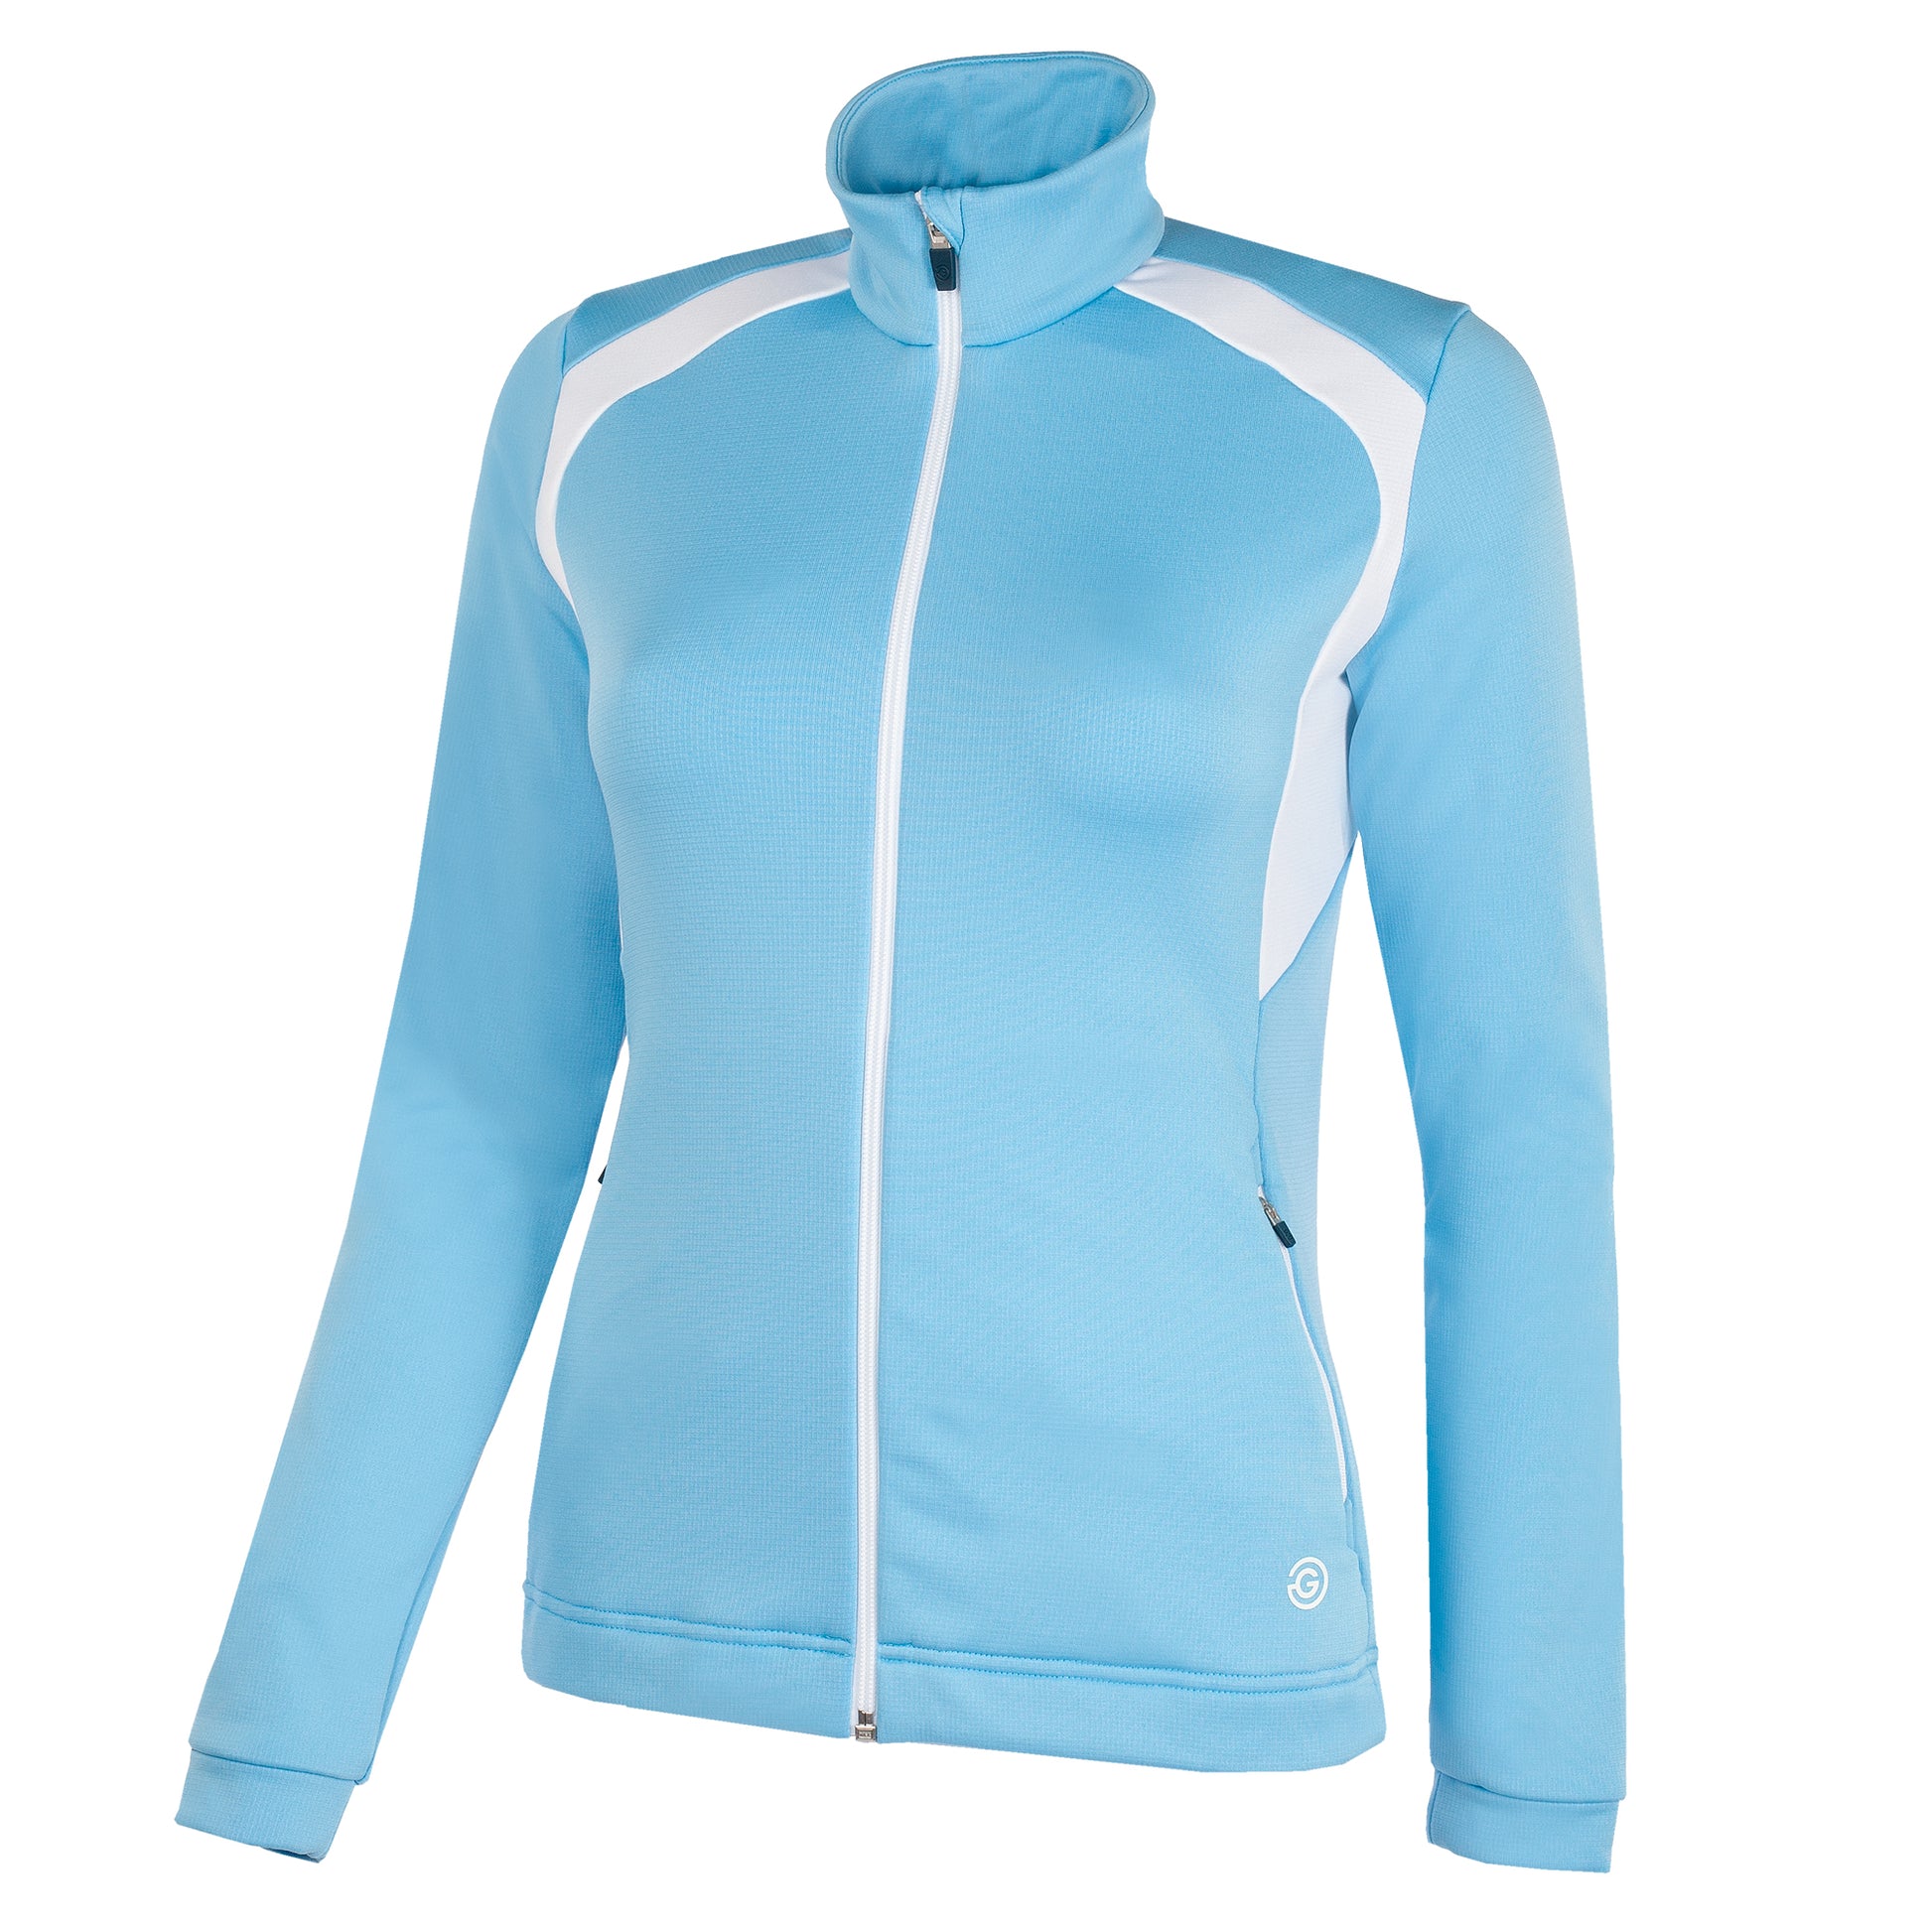 Galvin Green Ladies INSULA Jacket with Contrast Panels in Alaskan Blue